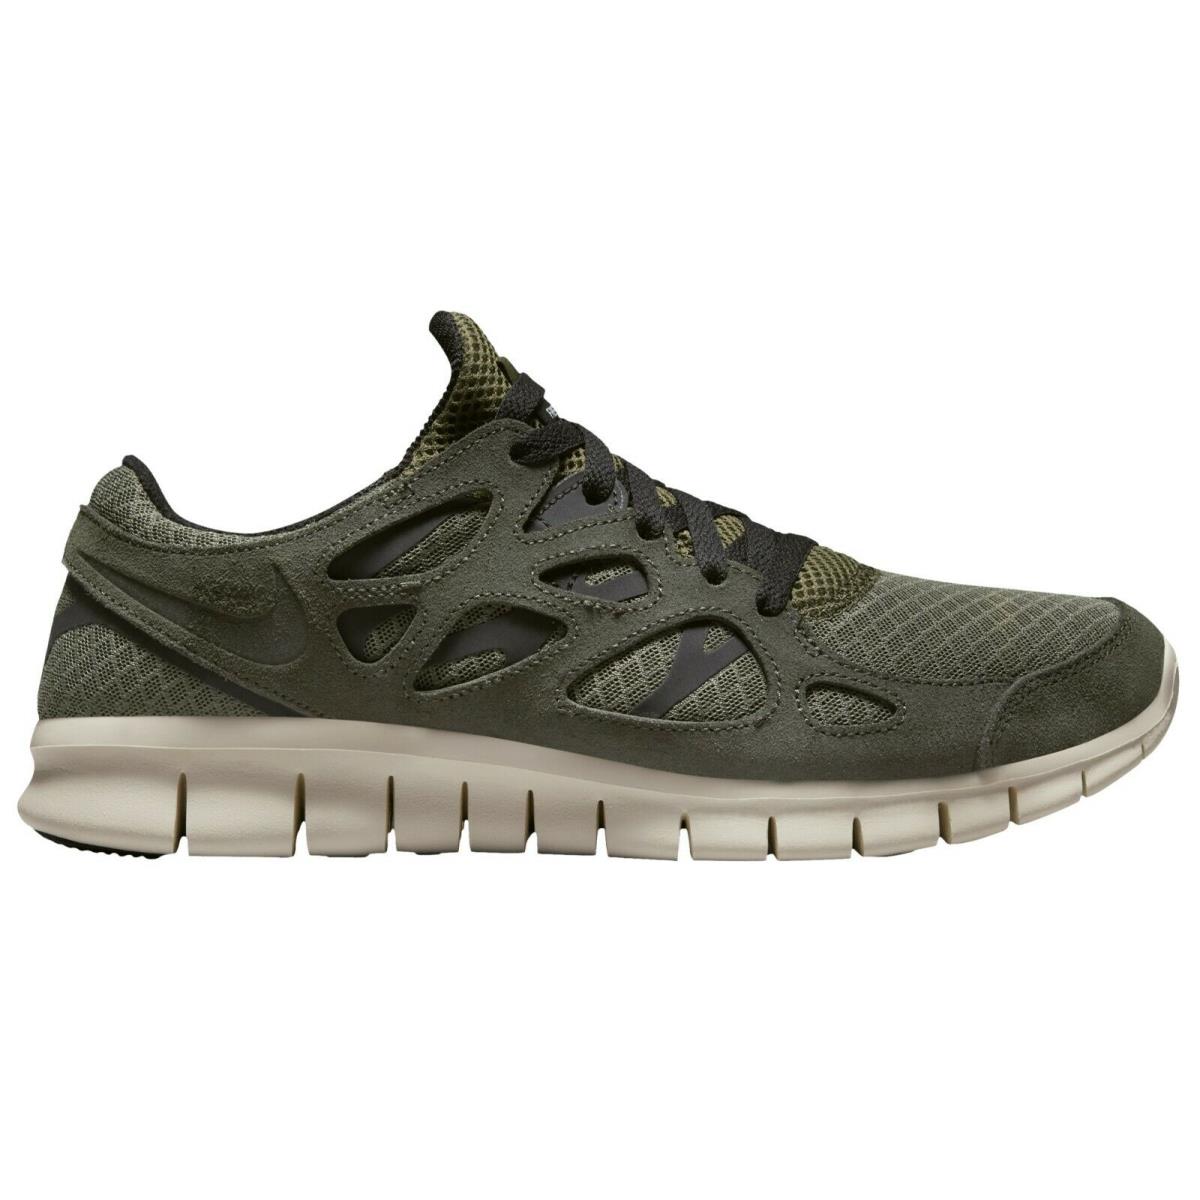 Nike Free Run 2 Mens 537732-305 Sequoia Olive Sail Black Running Shoes Size 8.5